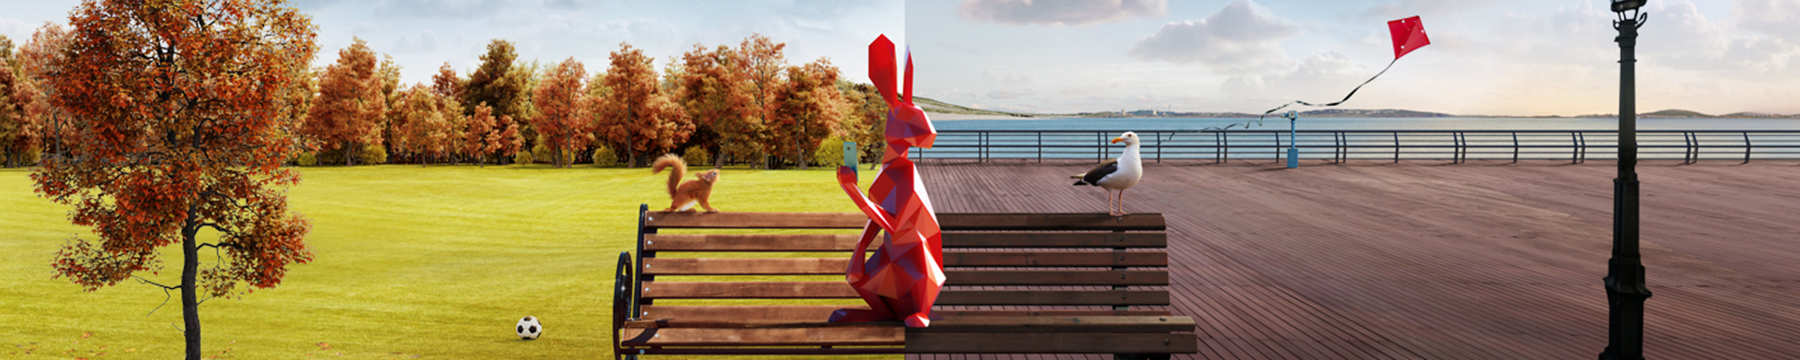 The Greater Anglia hare buying tickets on the app on a bench at the park and a pier